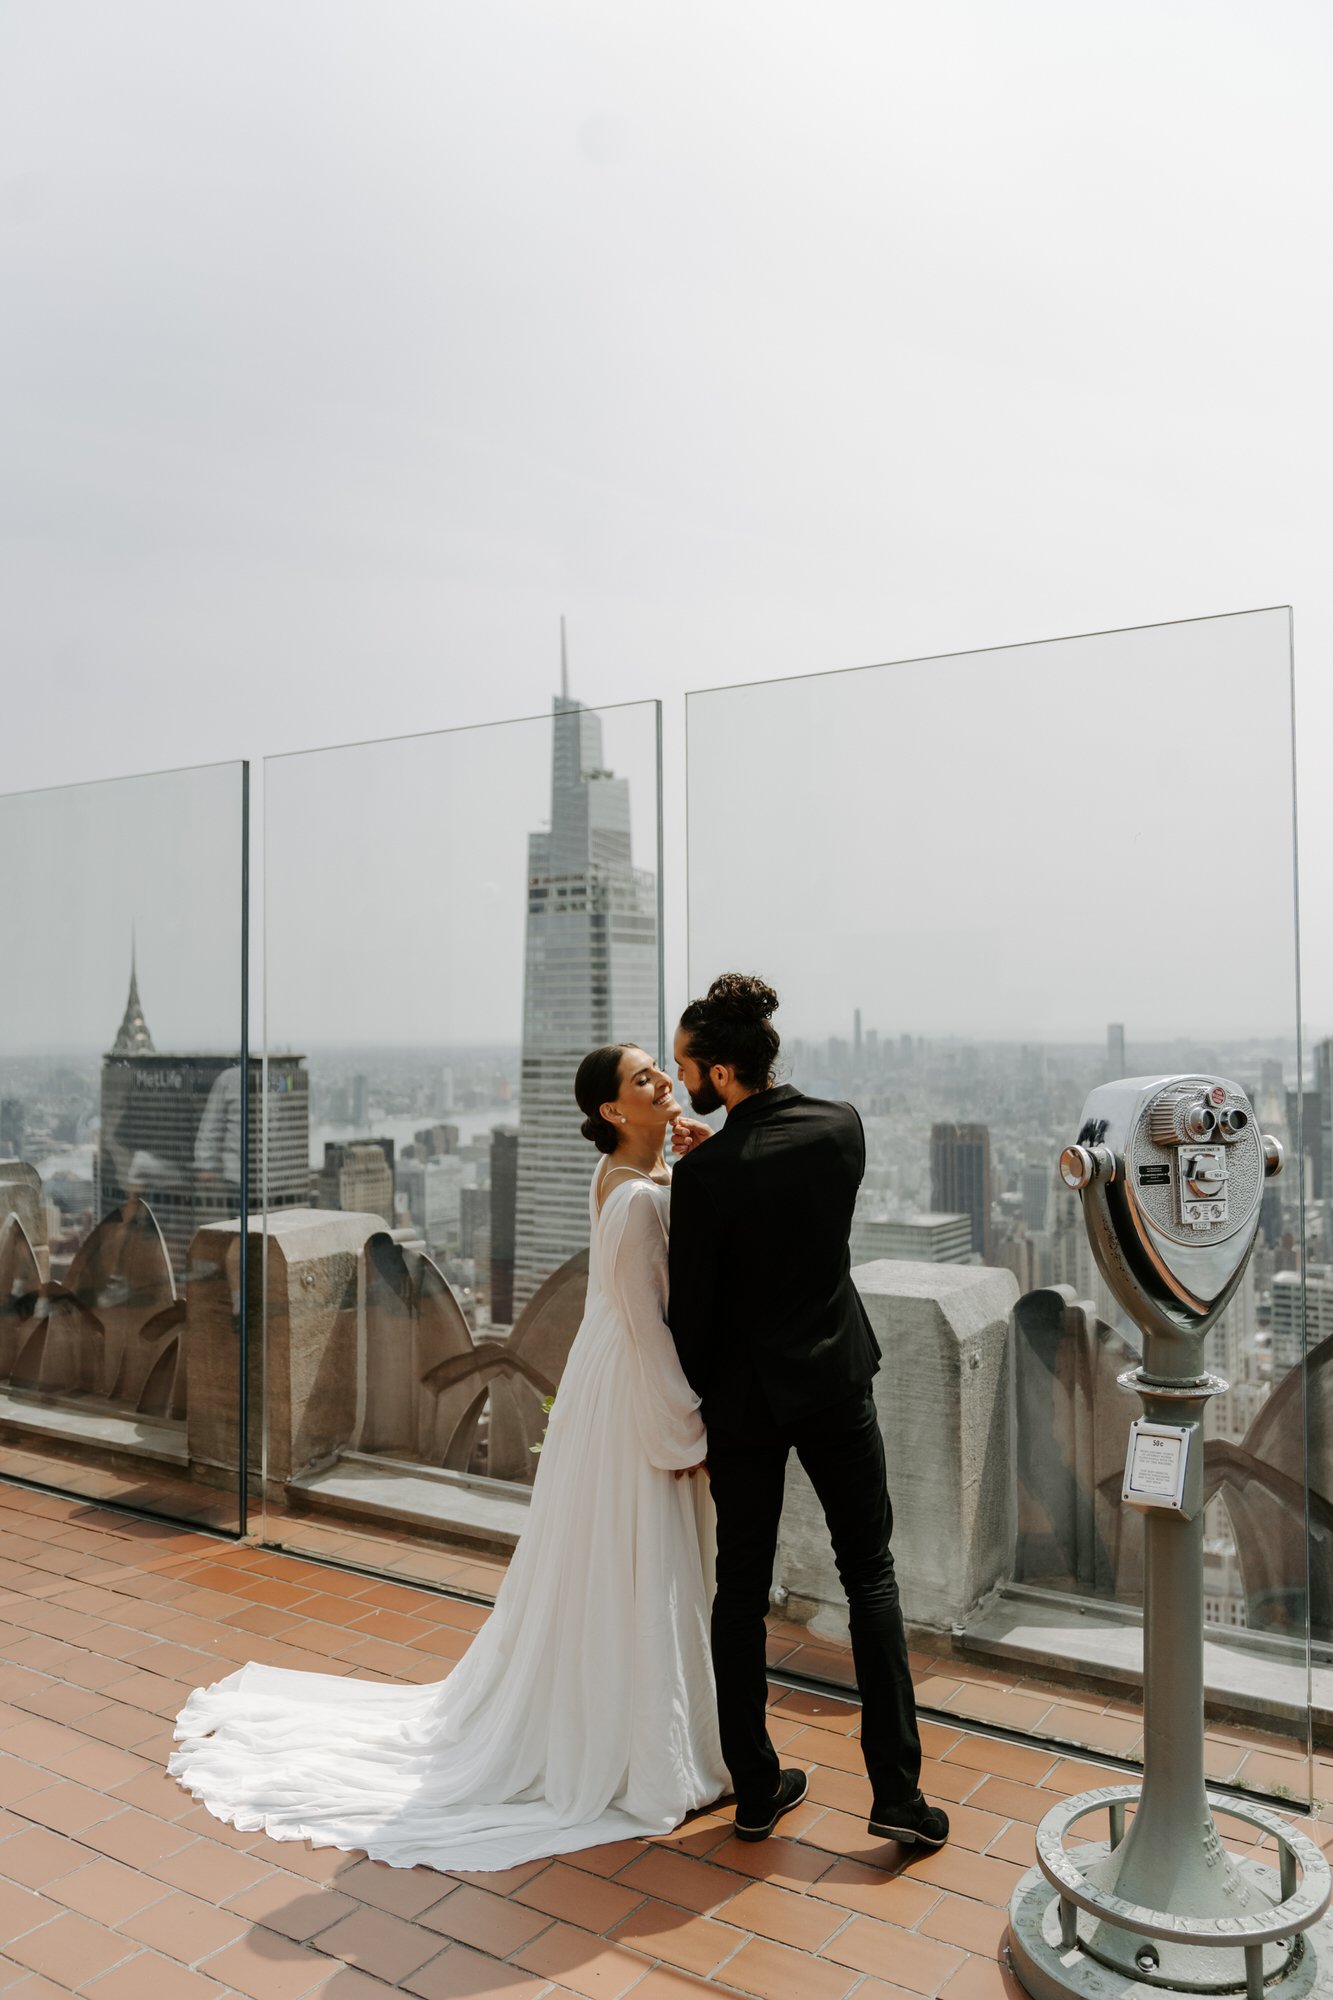 NYC-Top-of-The-Rock-Elopement-NYC-Photographer-Steph-Powell-Creative-15.jpg